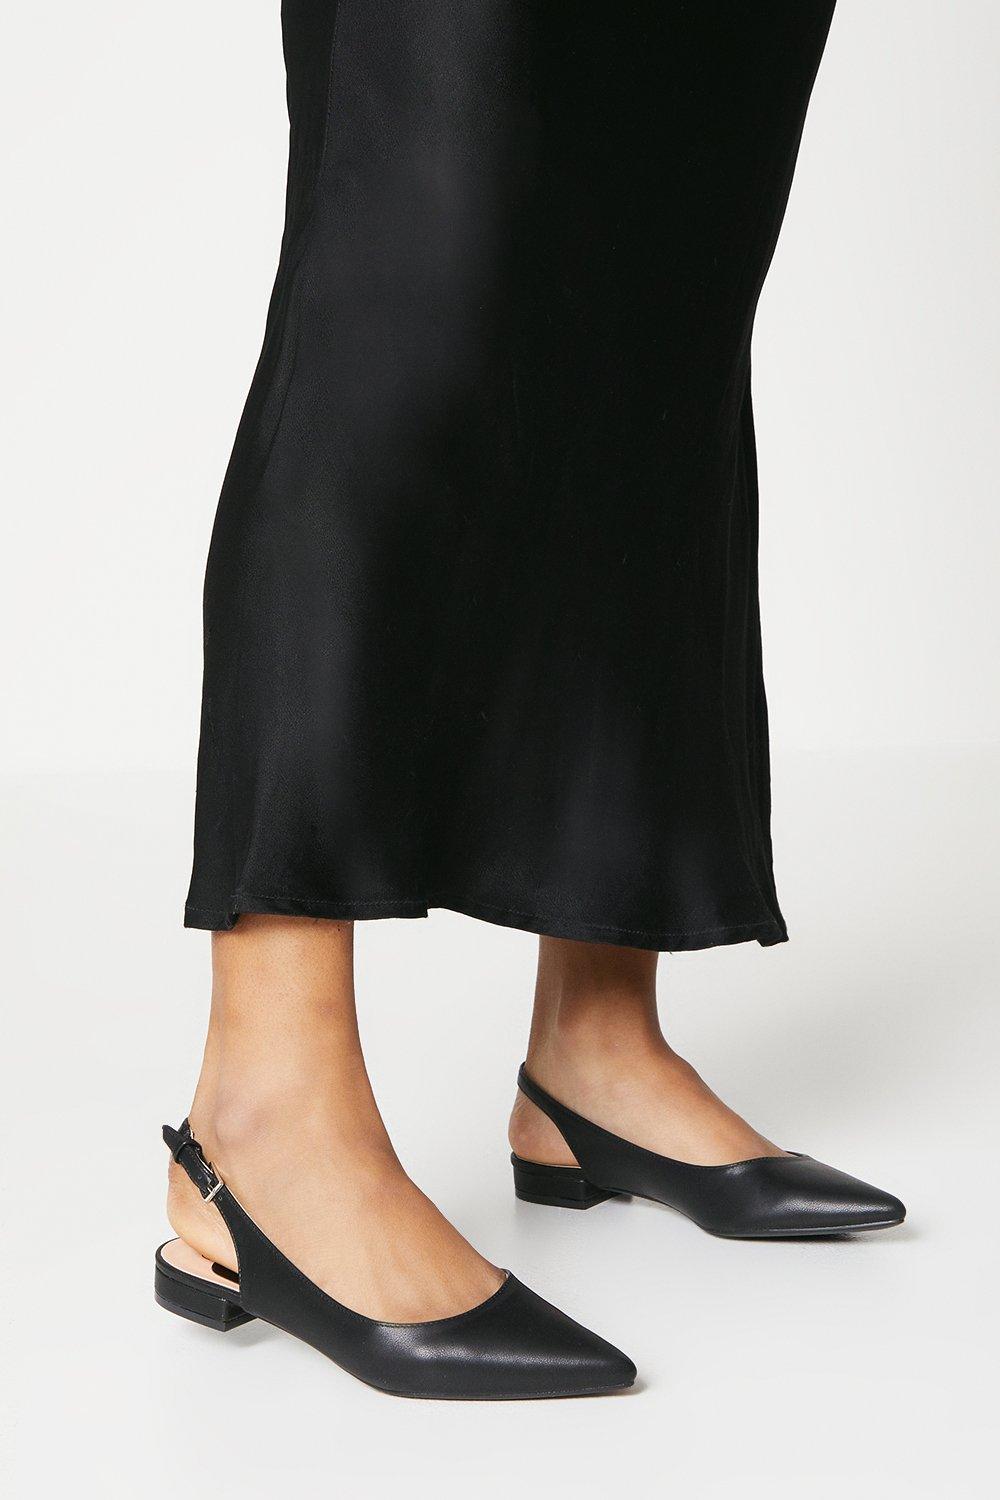 Women’s Pippin Pointed Slingback Ballet Pumps - black - 6